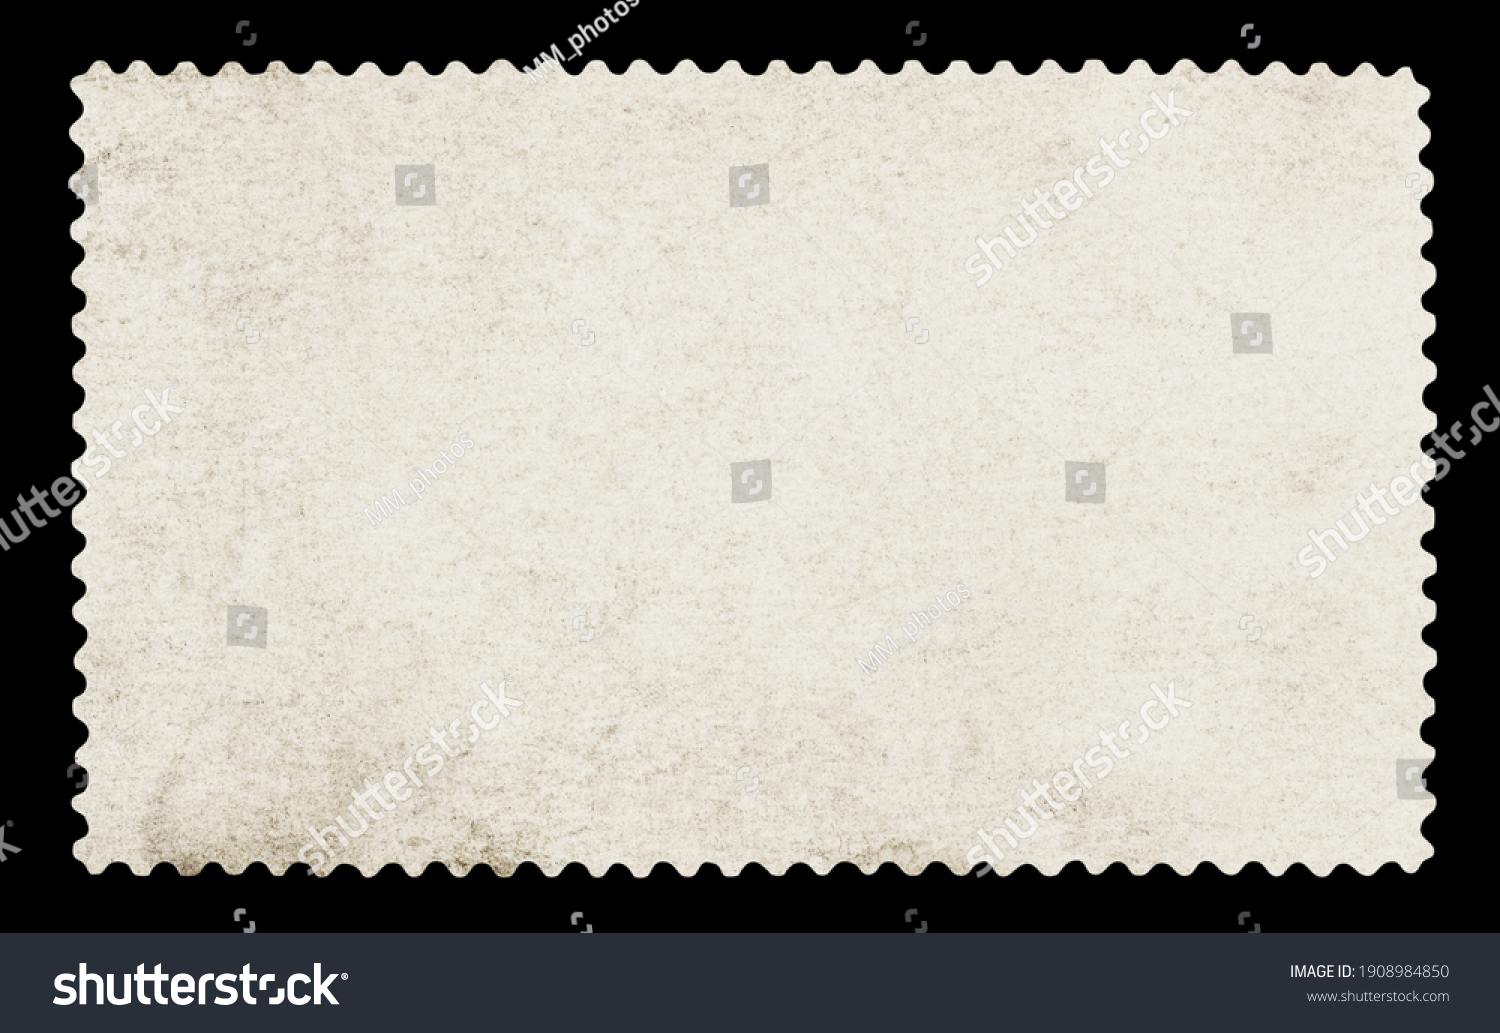 Blank postage stamp - Isolated on Black background	 #1908984850